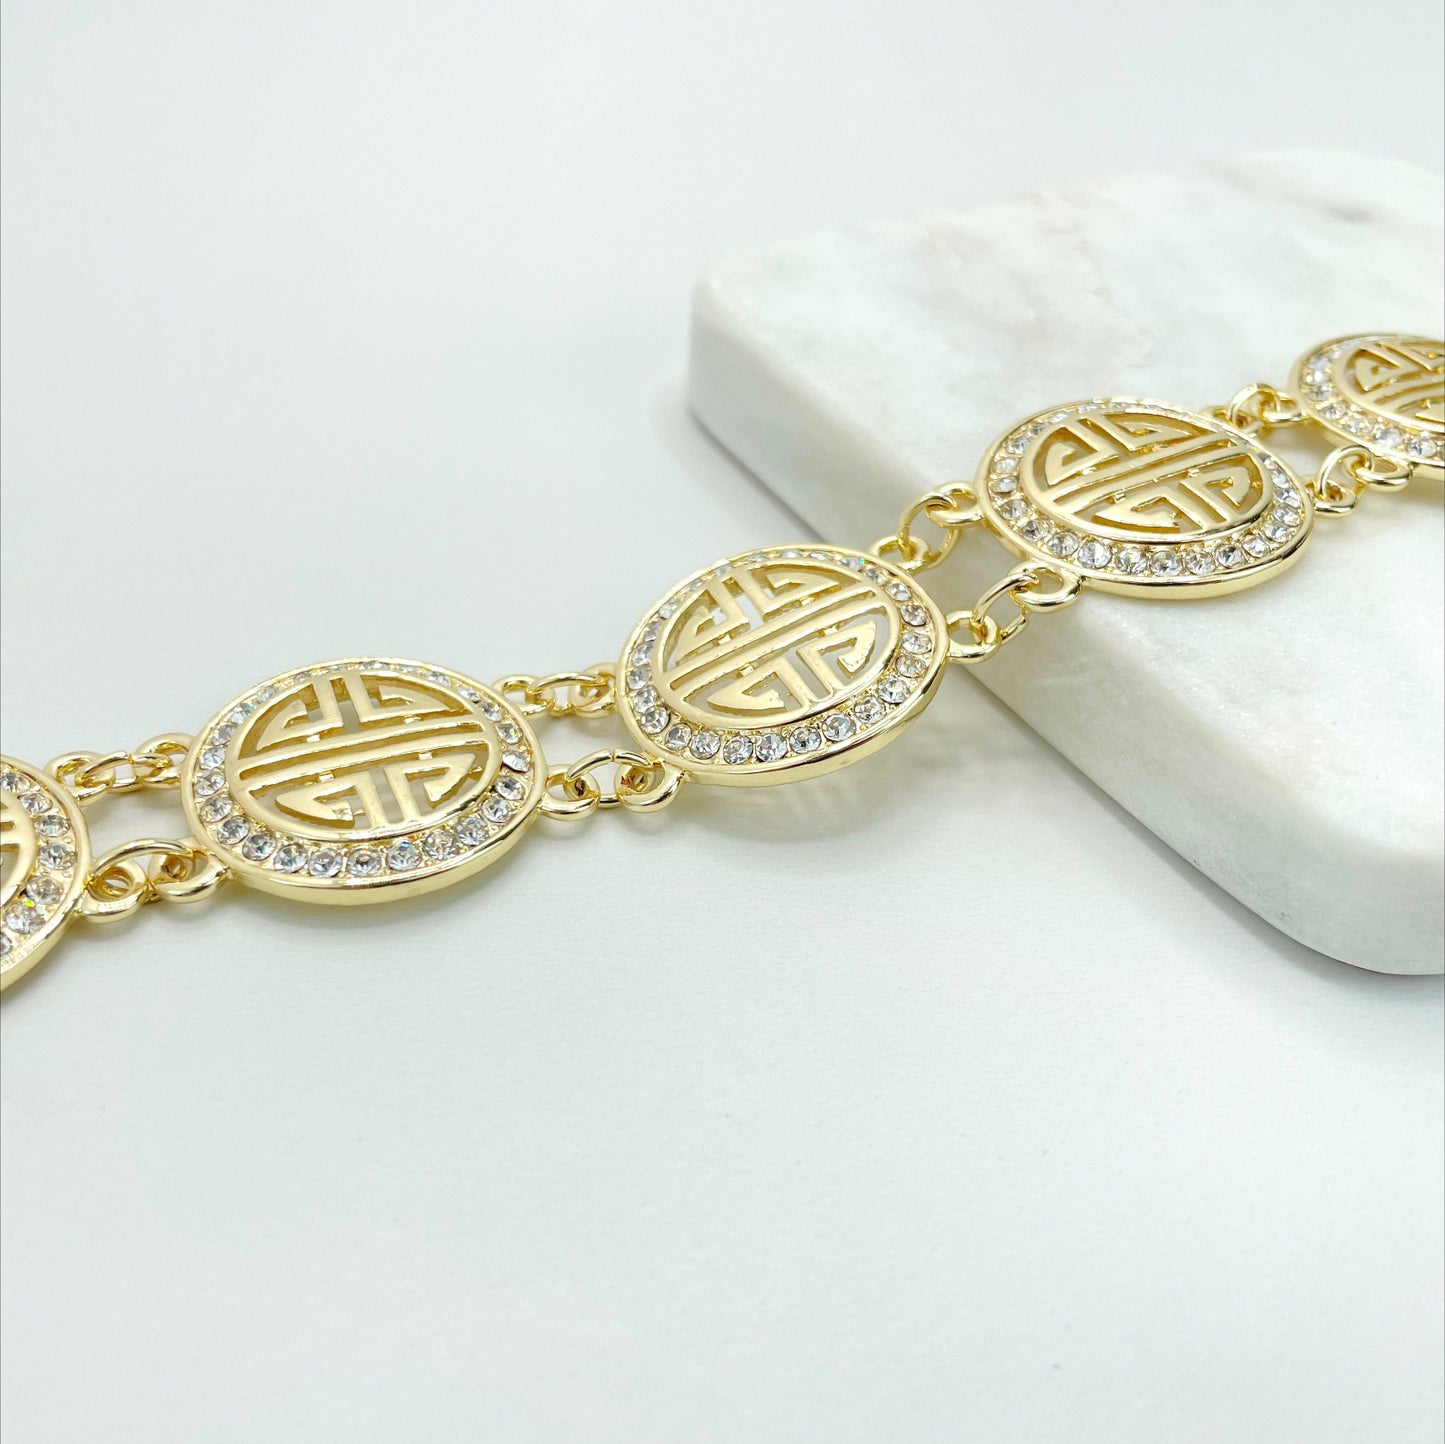 18k Gold Plated Cubic Zirconia Chinese Four Blessing Symbol Bracelet, Spring Clasp Wholesale Jewelry Making Supplies